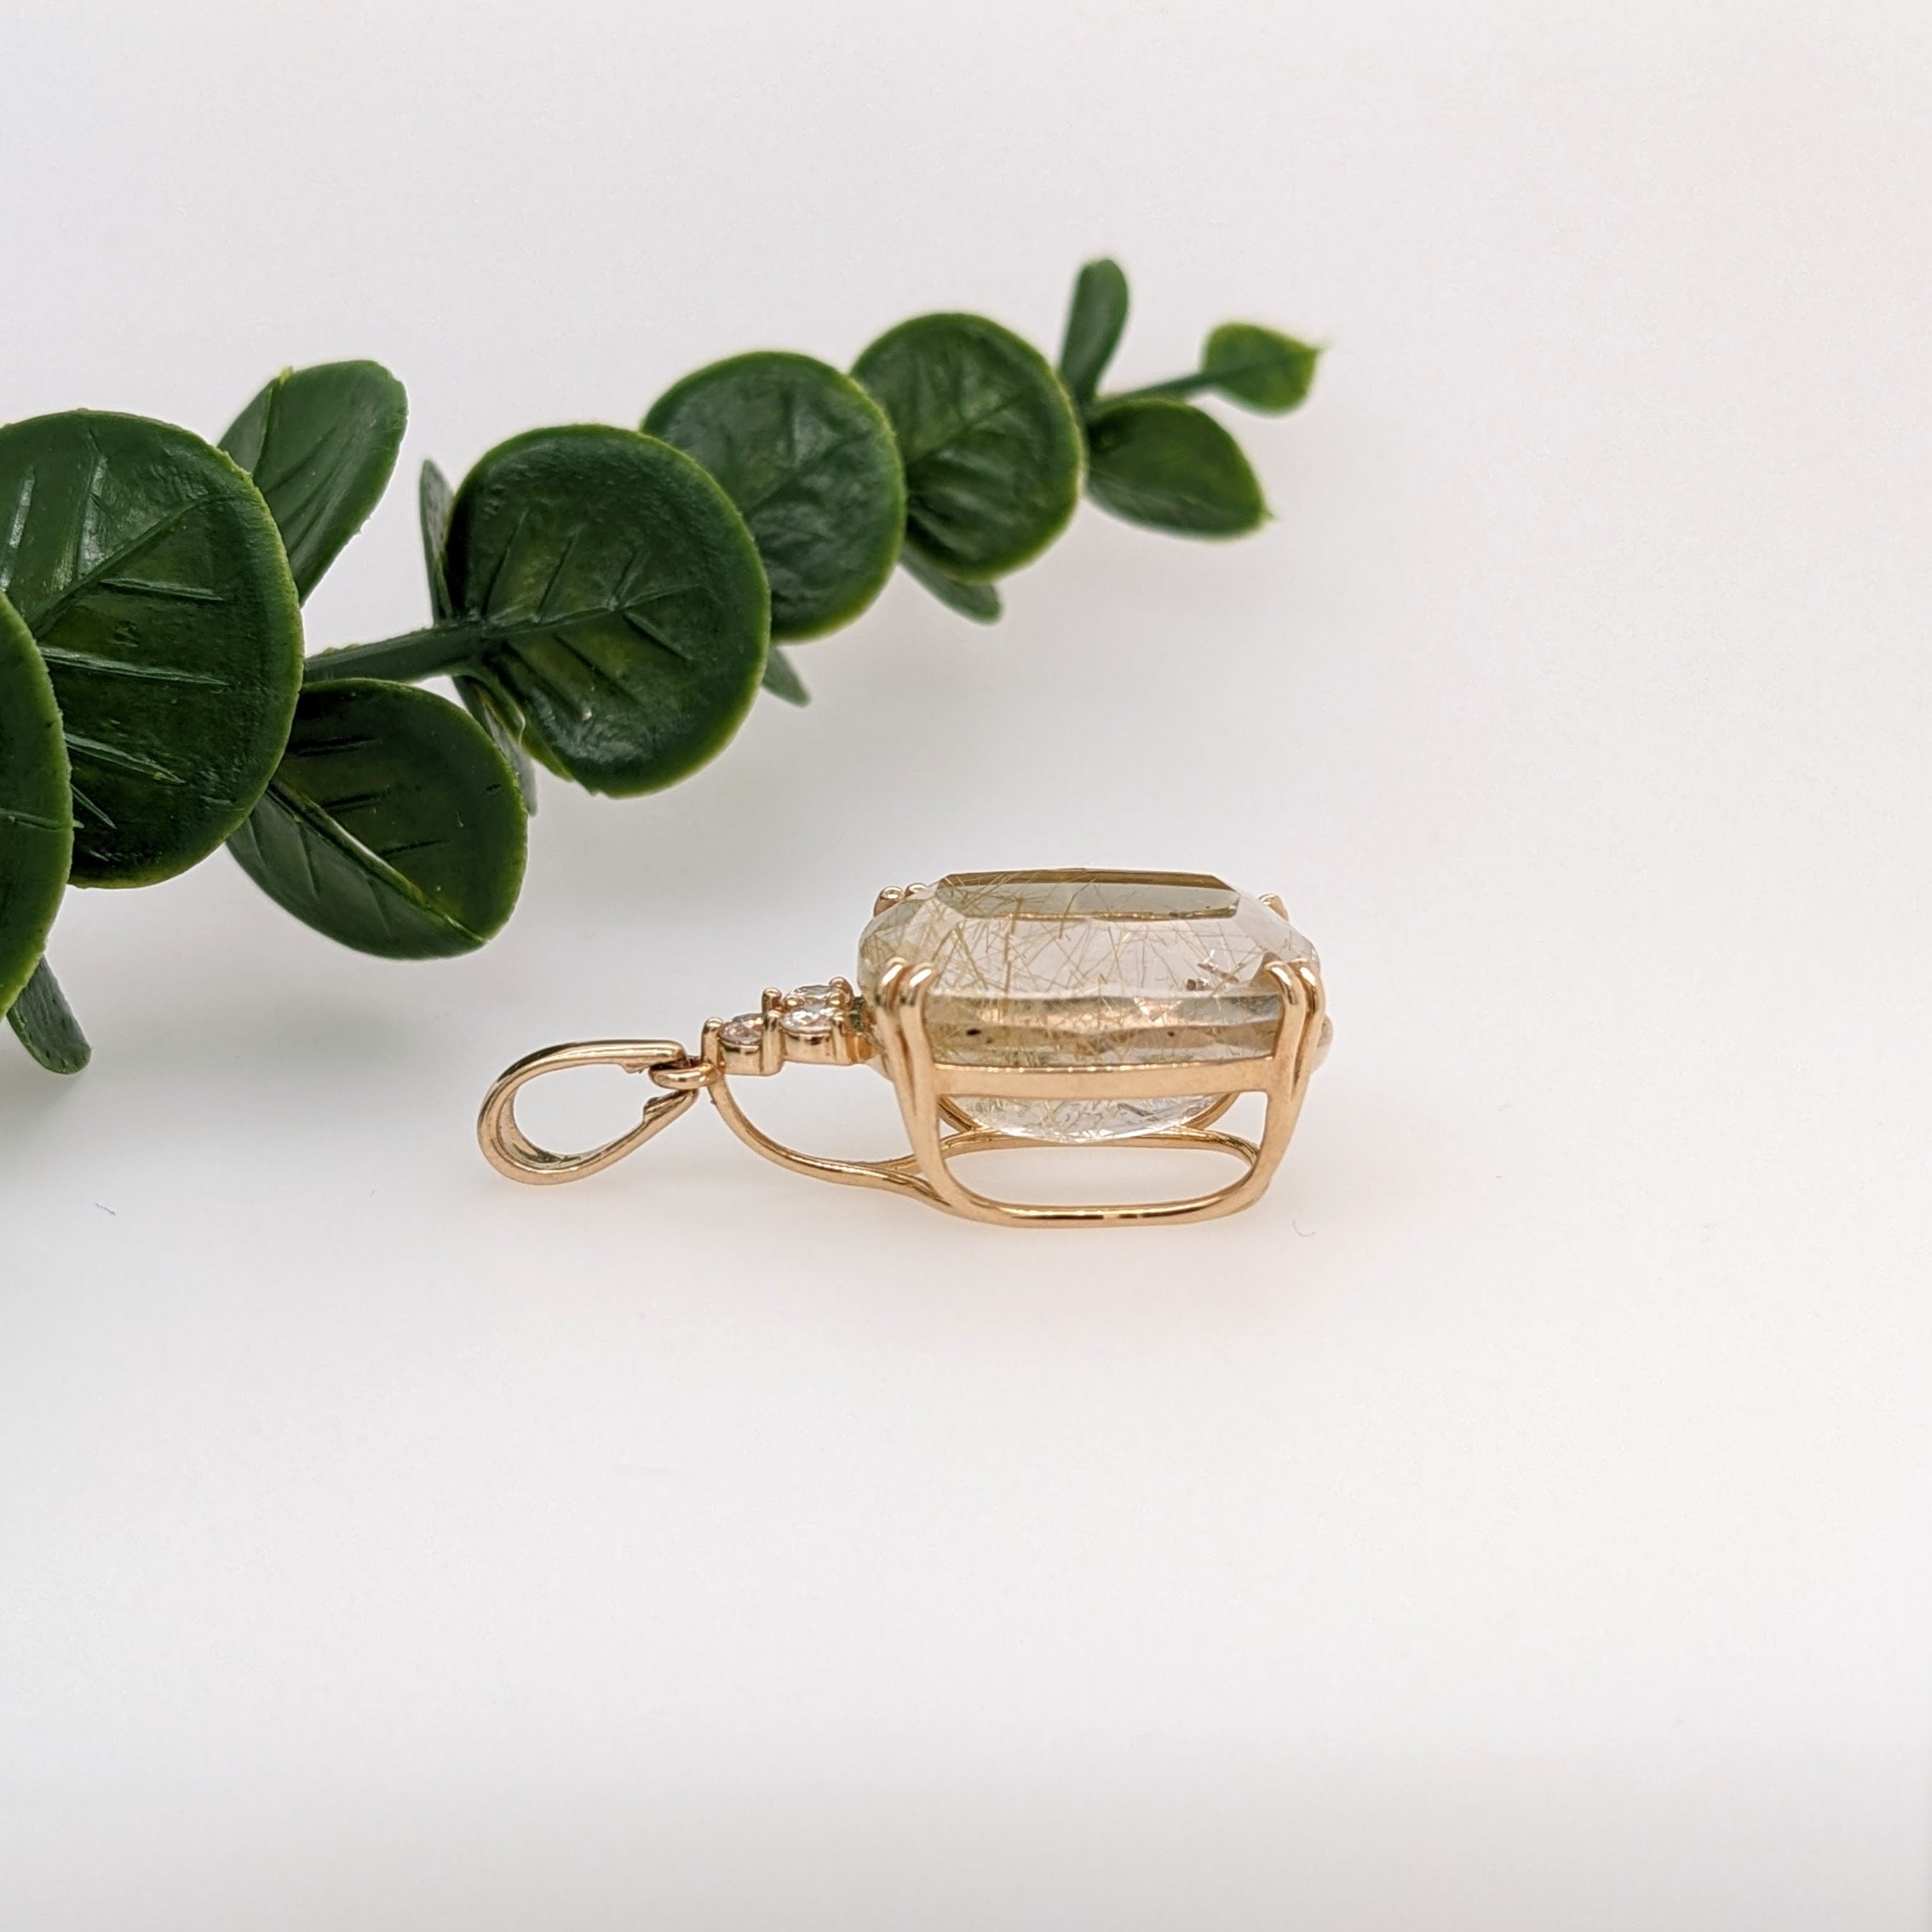 Lovely Gold Rutilated Quartz Pendant in Solid 14K Yellow Gold with Diamond Accents | Cushion 18x16mm | April Birthstone | Natural Gemstone